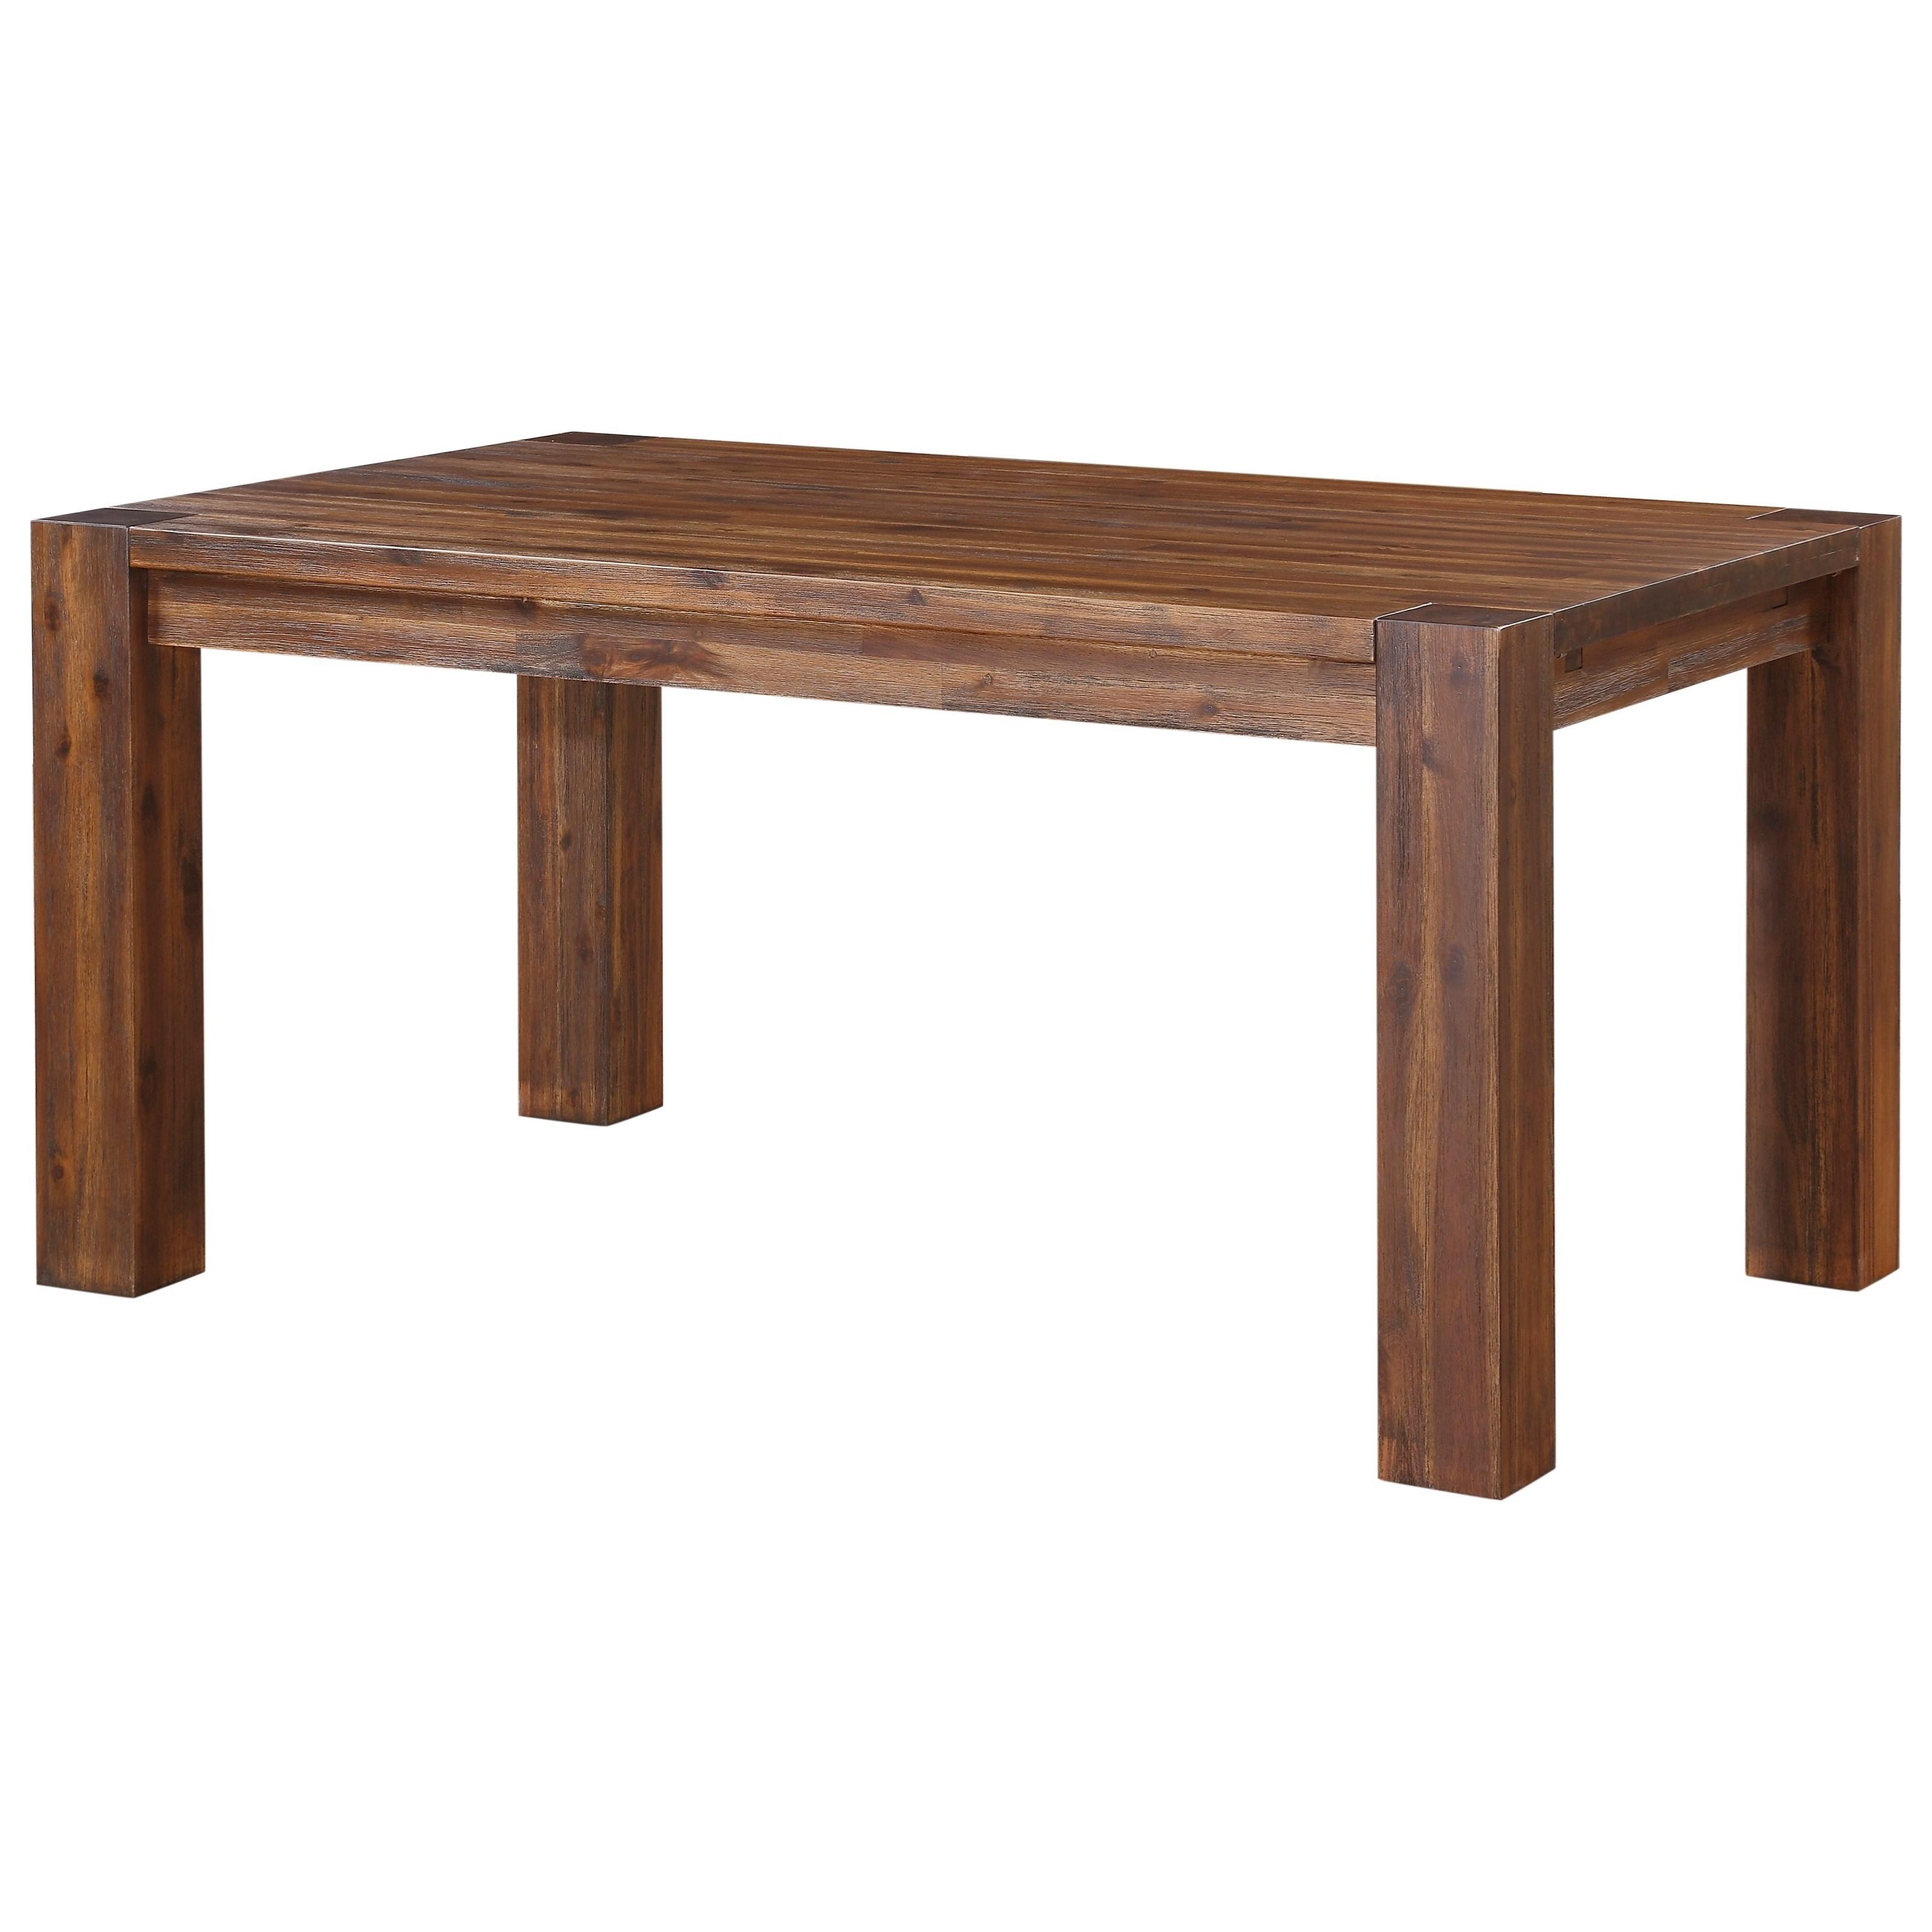 

    
Modus Furniture MEADOW Dining Table Set Brick 3F4161-7PC
